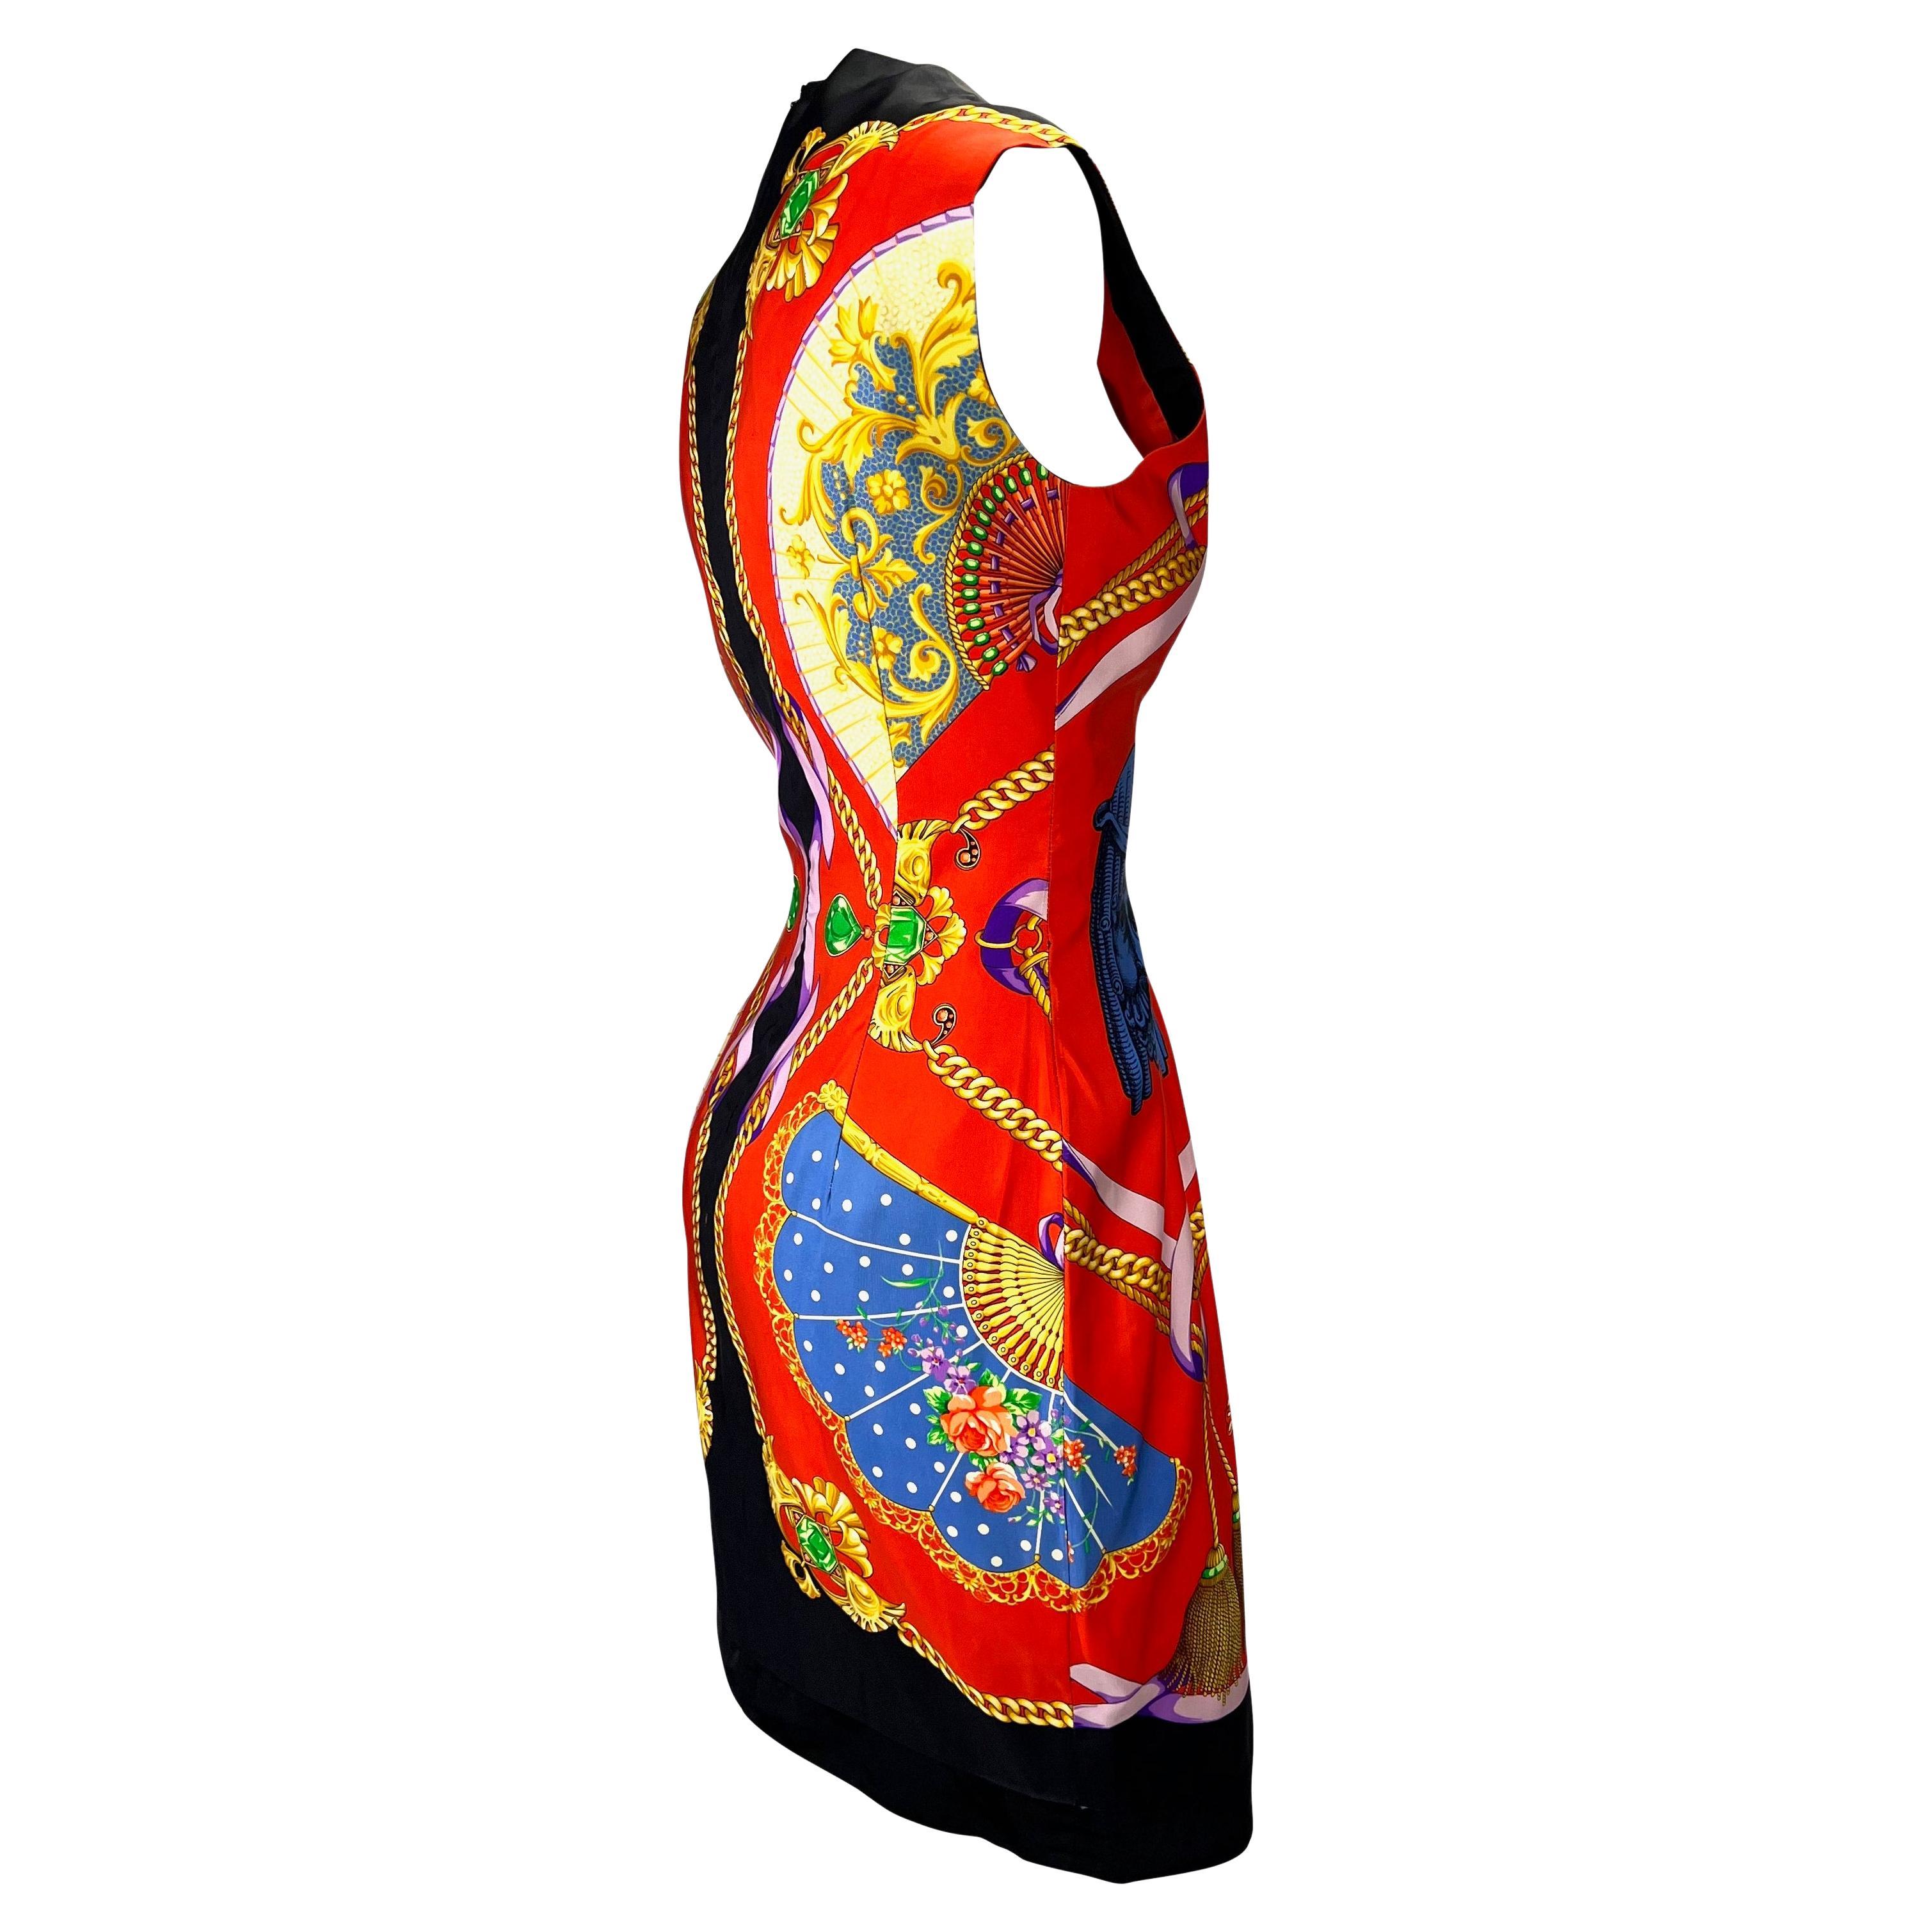 Women's S/S 1991 Gianni Versace Couture Fan Atelier Print Red Silk Sleeveless Dress For Sale